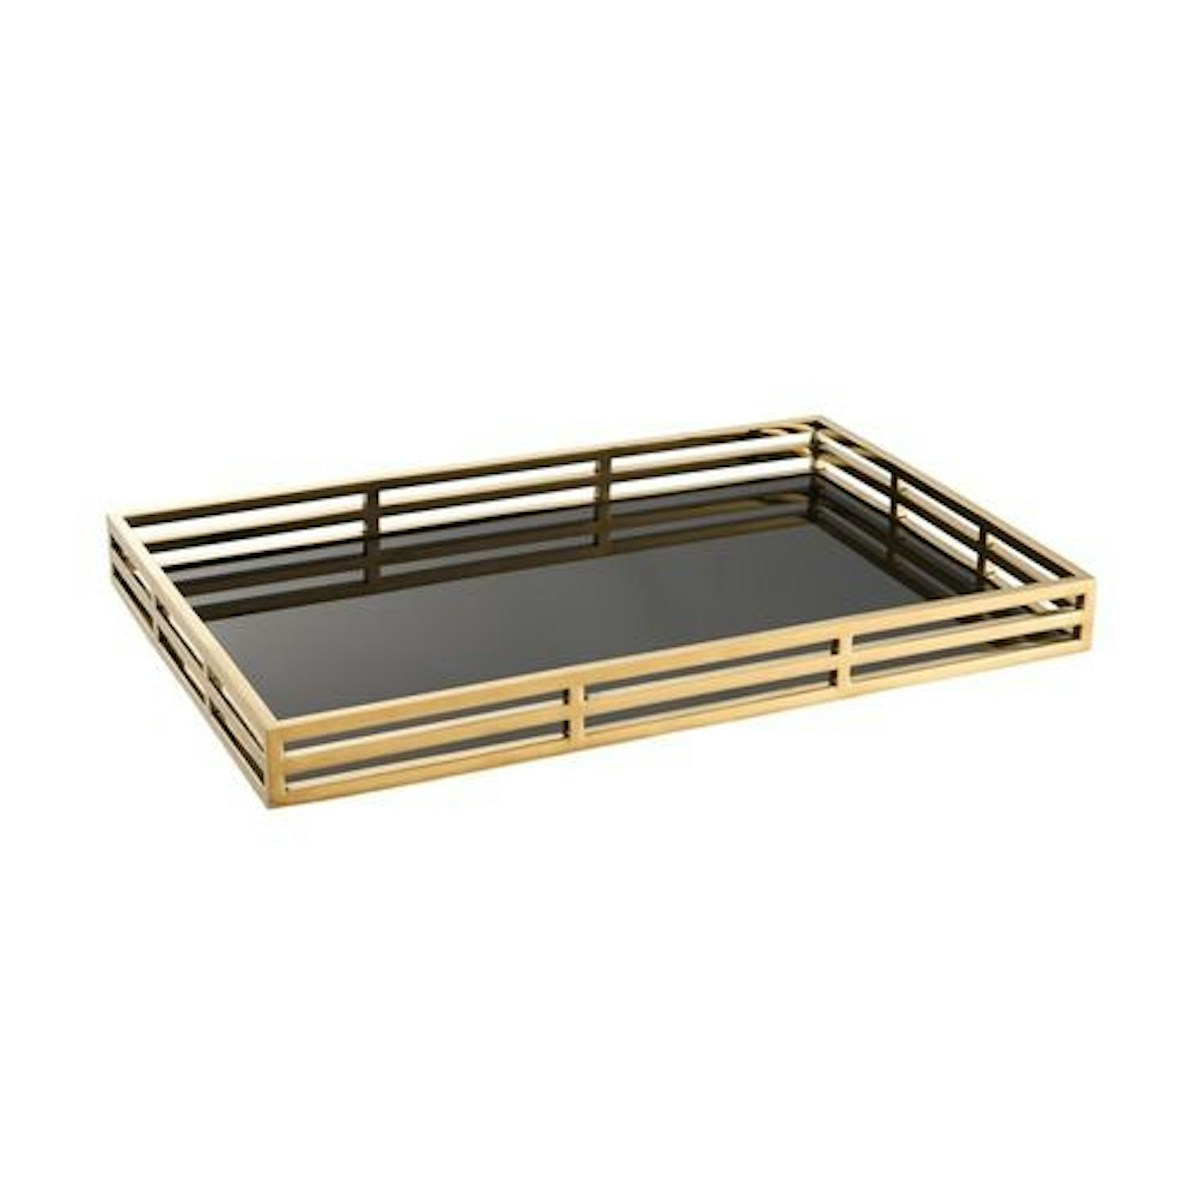 Gold Giacomo Tray - 21 Best Decorative Trays To Buy For Your Tabletop - LuxDeco.com